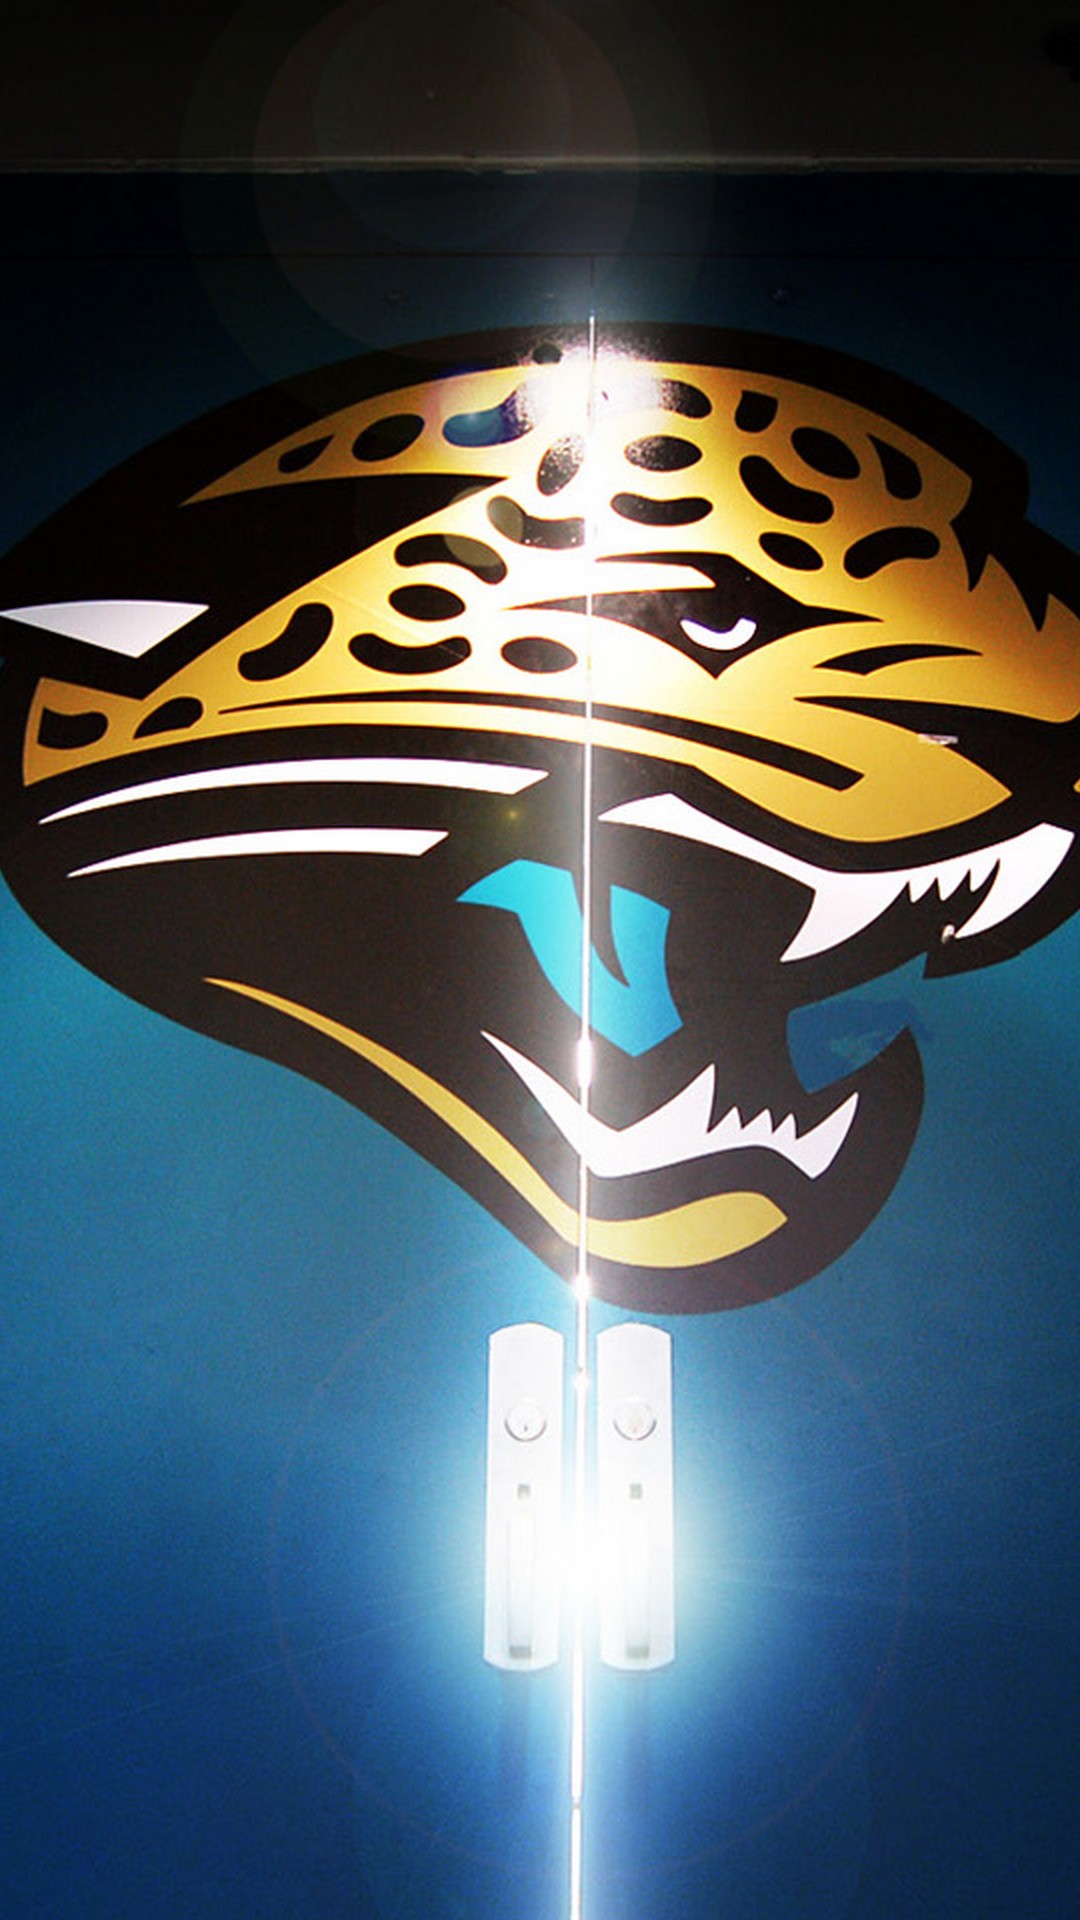 Jacksonville Jaguars NFL iPhone Screen Wallpaper With high-resolution 1080X1920 pixel. Donwload and set as wallpaper for your iPhone X, iPhone XS home screen backgrounds, XS Max, XR, iPhone8 lock screen wallpaper, iPhone 7, 6, SE, and other mobile devices